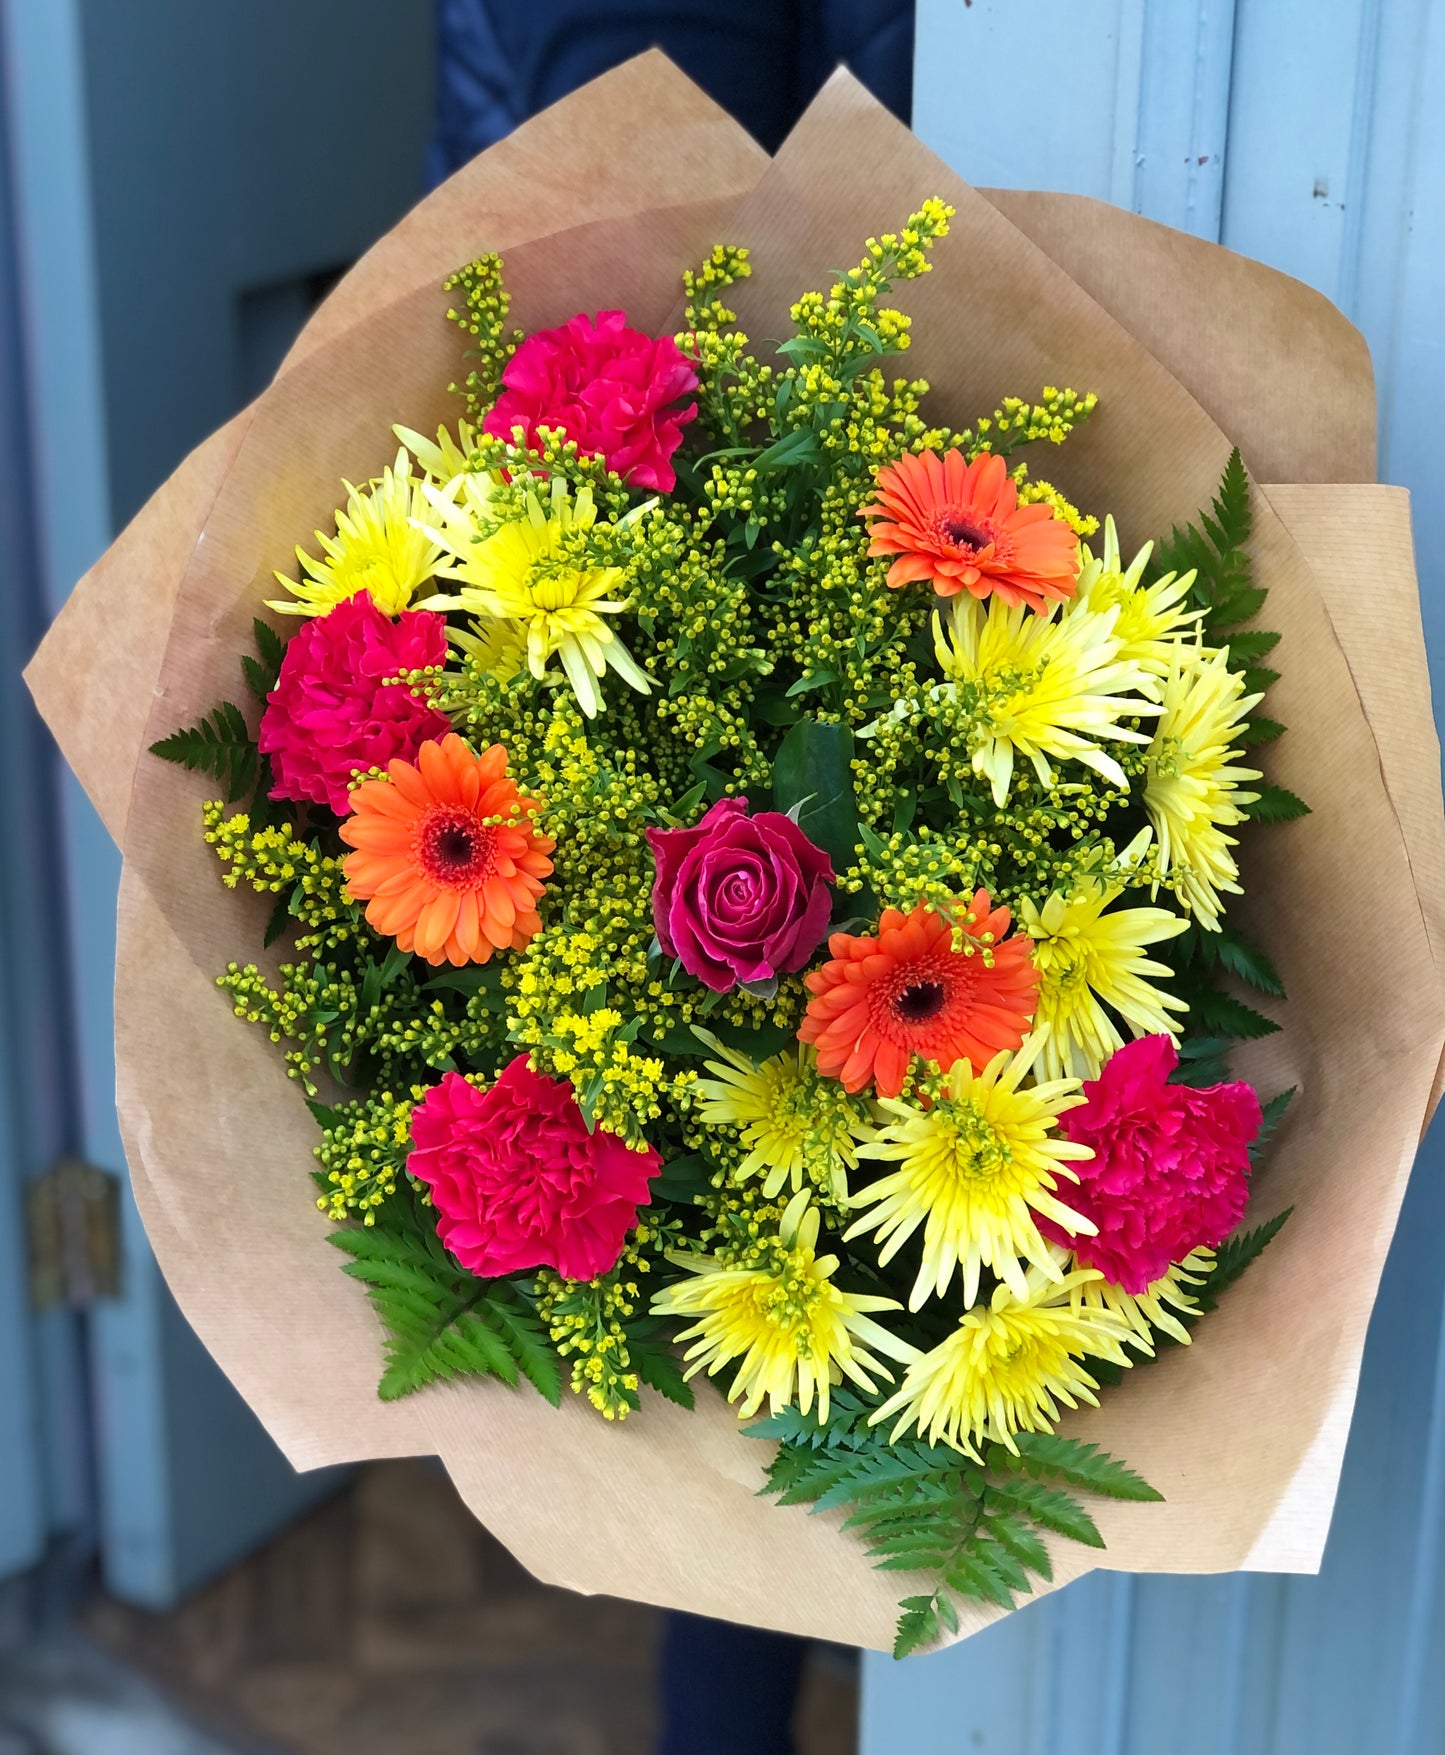 Flowers delivered to your door once a month for 6 Months with the purchase of a Subscription